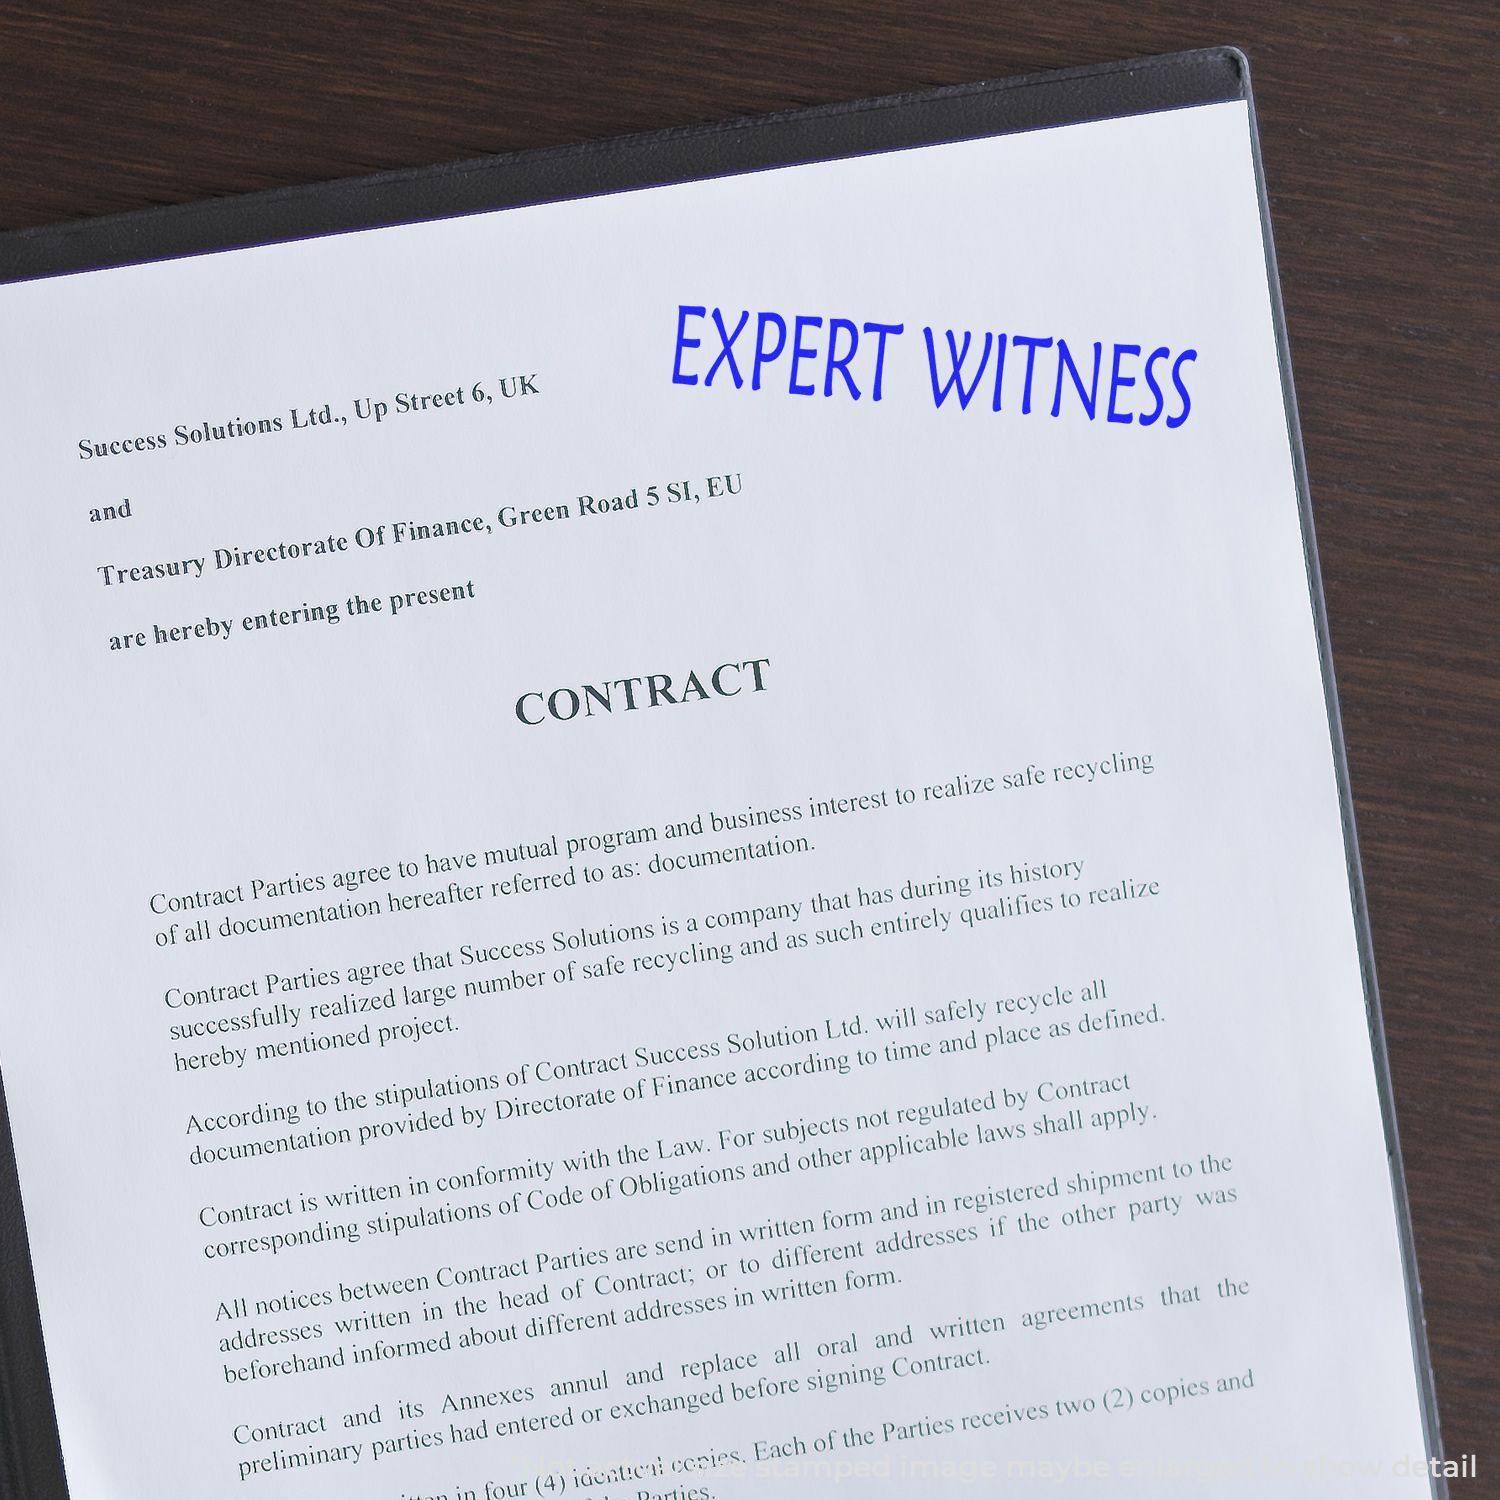 A stock office pre-inked stamp with a stamped image showing how the text "EXPERT WITNESS" is displayed after stamping.